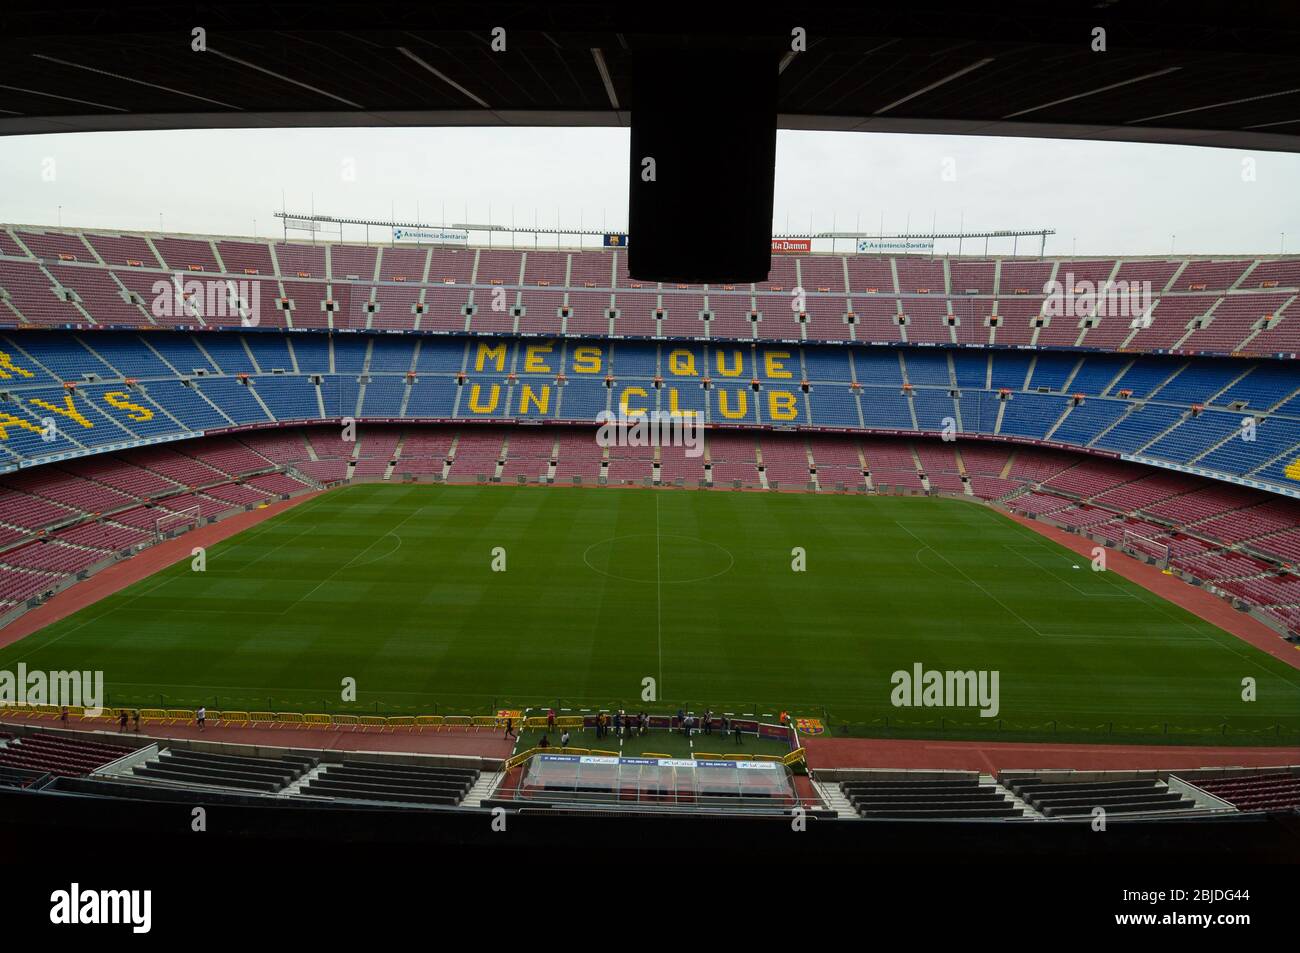 Barcelona, Spain - September 22, 2014: Nou Camp is a largest stadium in Europe and the second largest association football stadium in the world. Barce Stock Photo